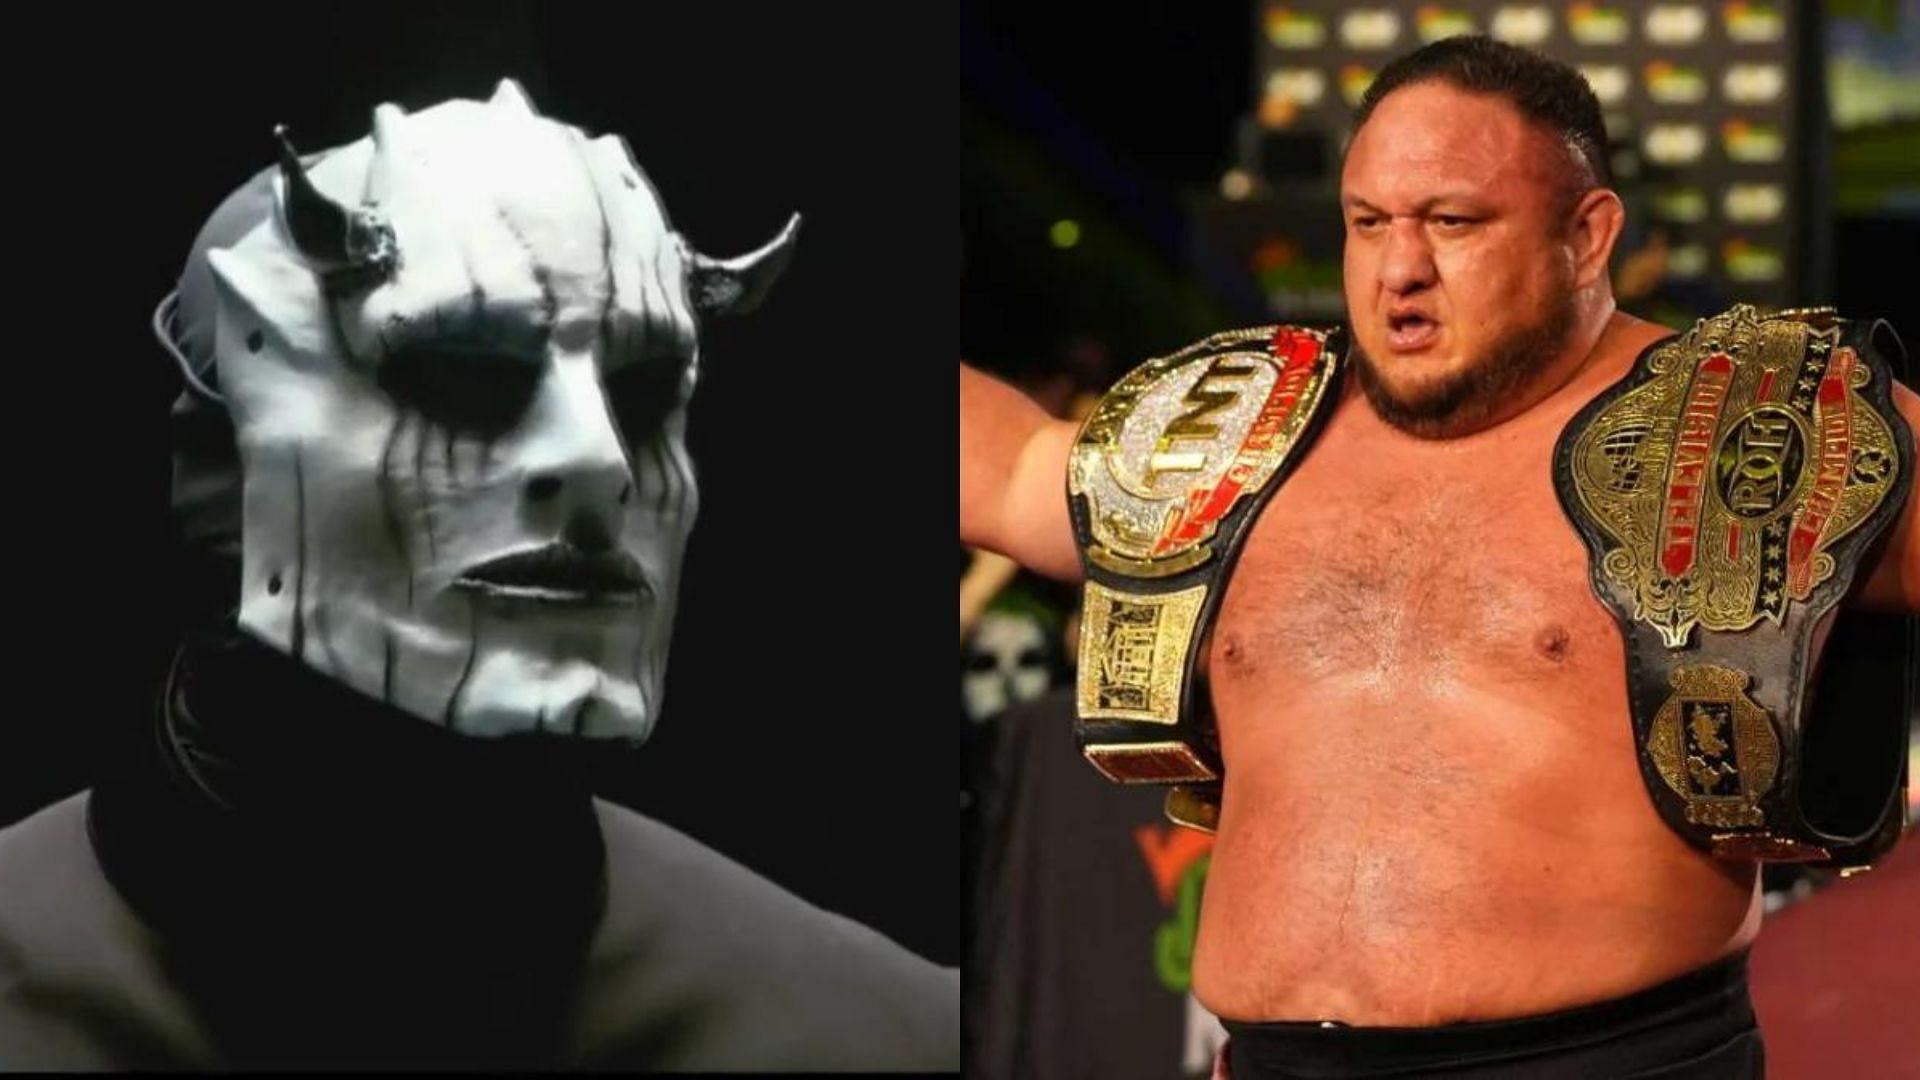 Samoa Joe has just made accusations about the identity of the Devil